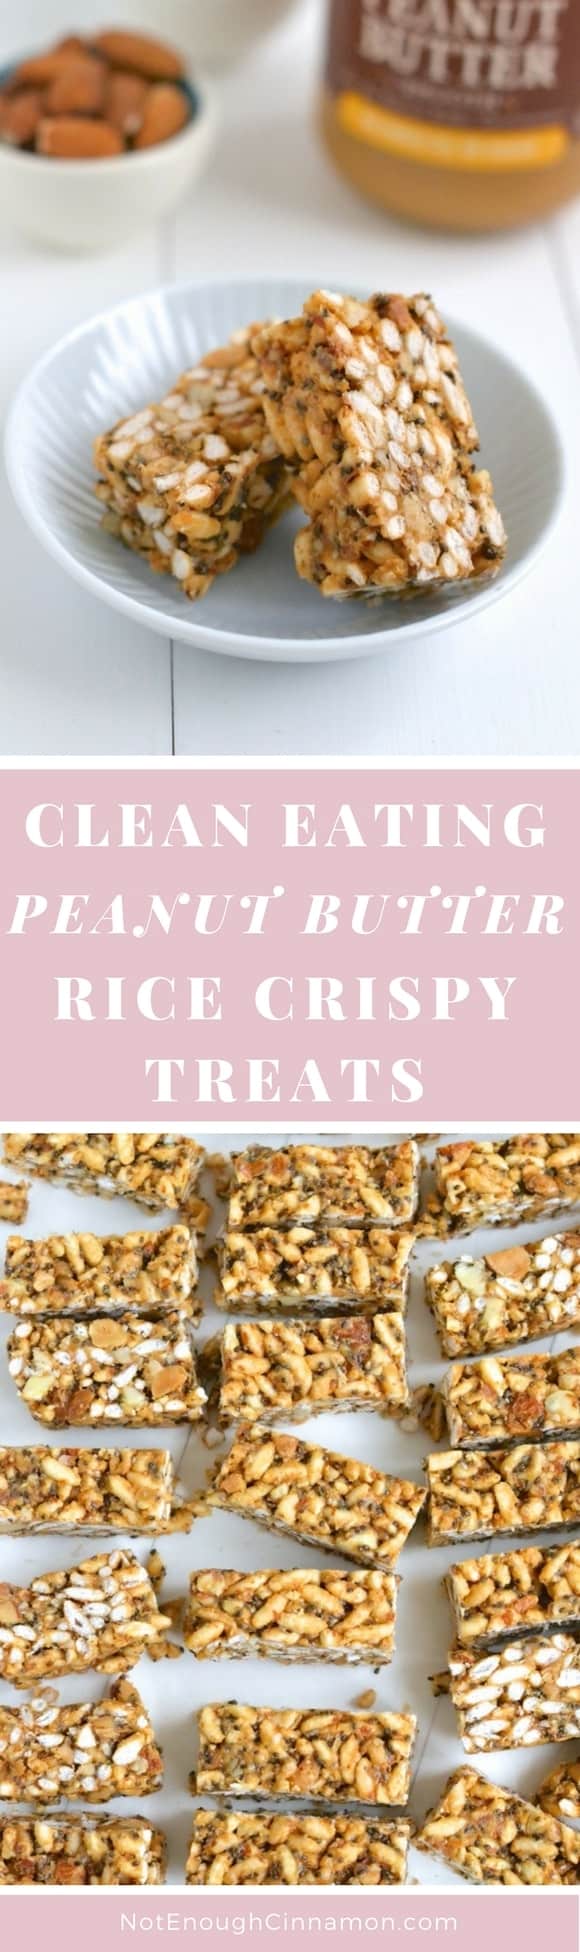 Clean Eating Peanut Butter Rice Crispy Treats - a delicious snack that's much better for you than its Krispie Treat cousin. Refined sugar free, gluten free. Find the recipe on NotEnoughCinnamon.com